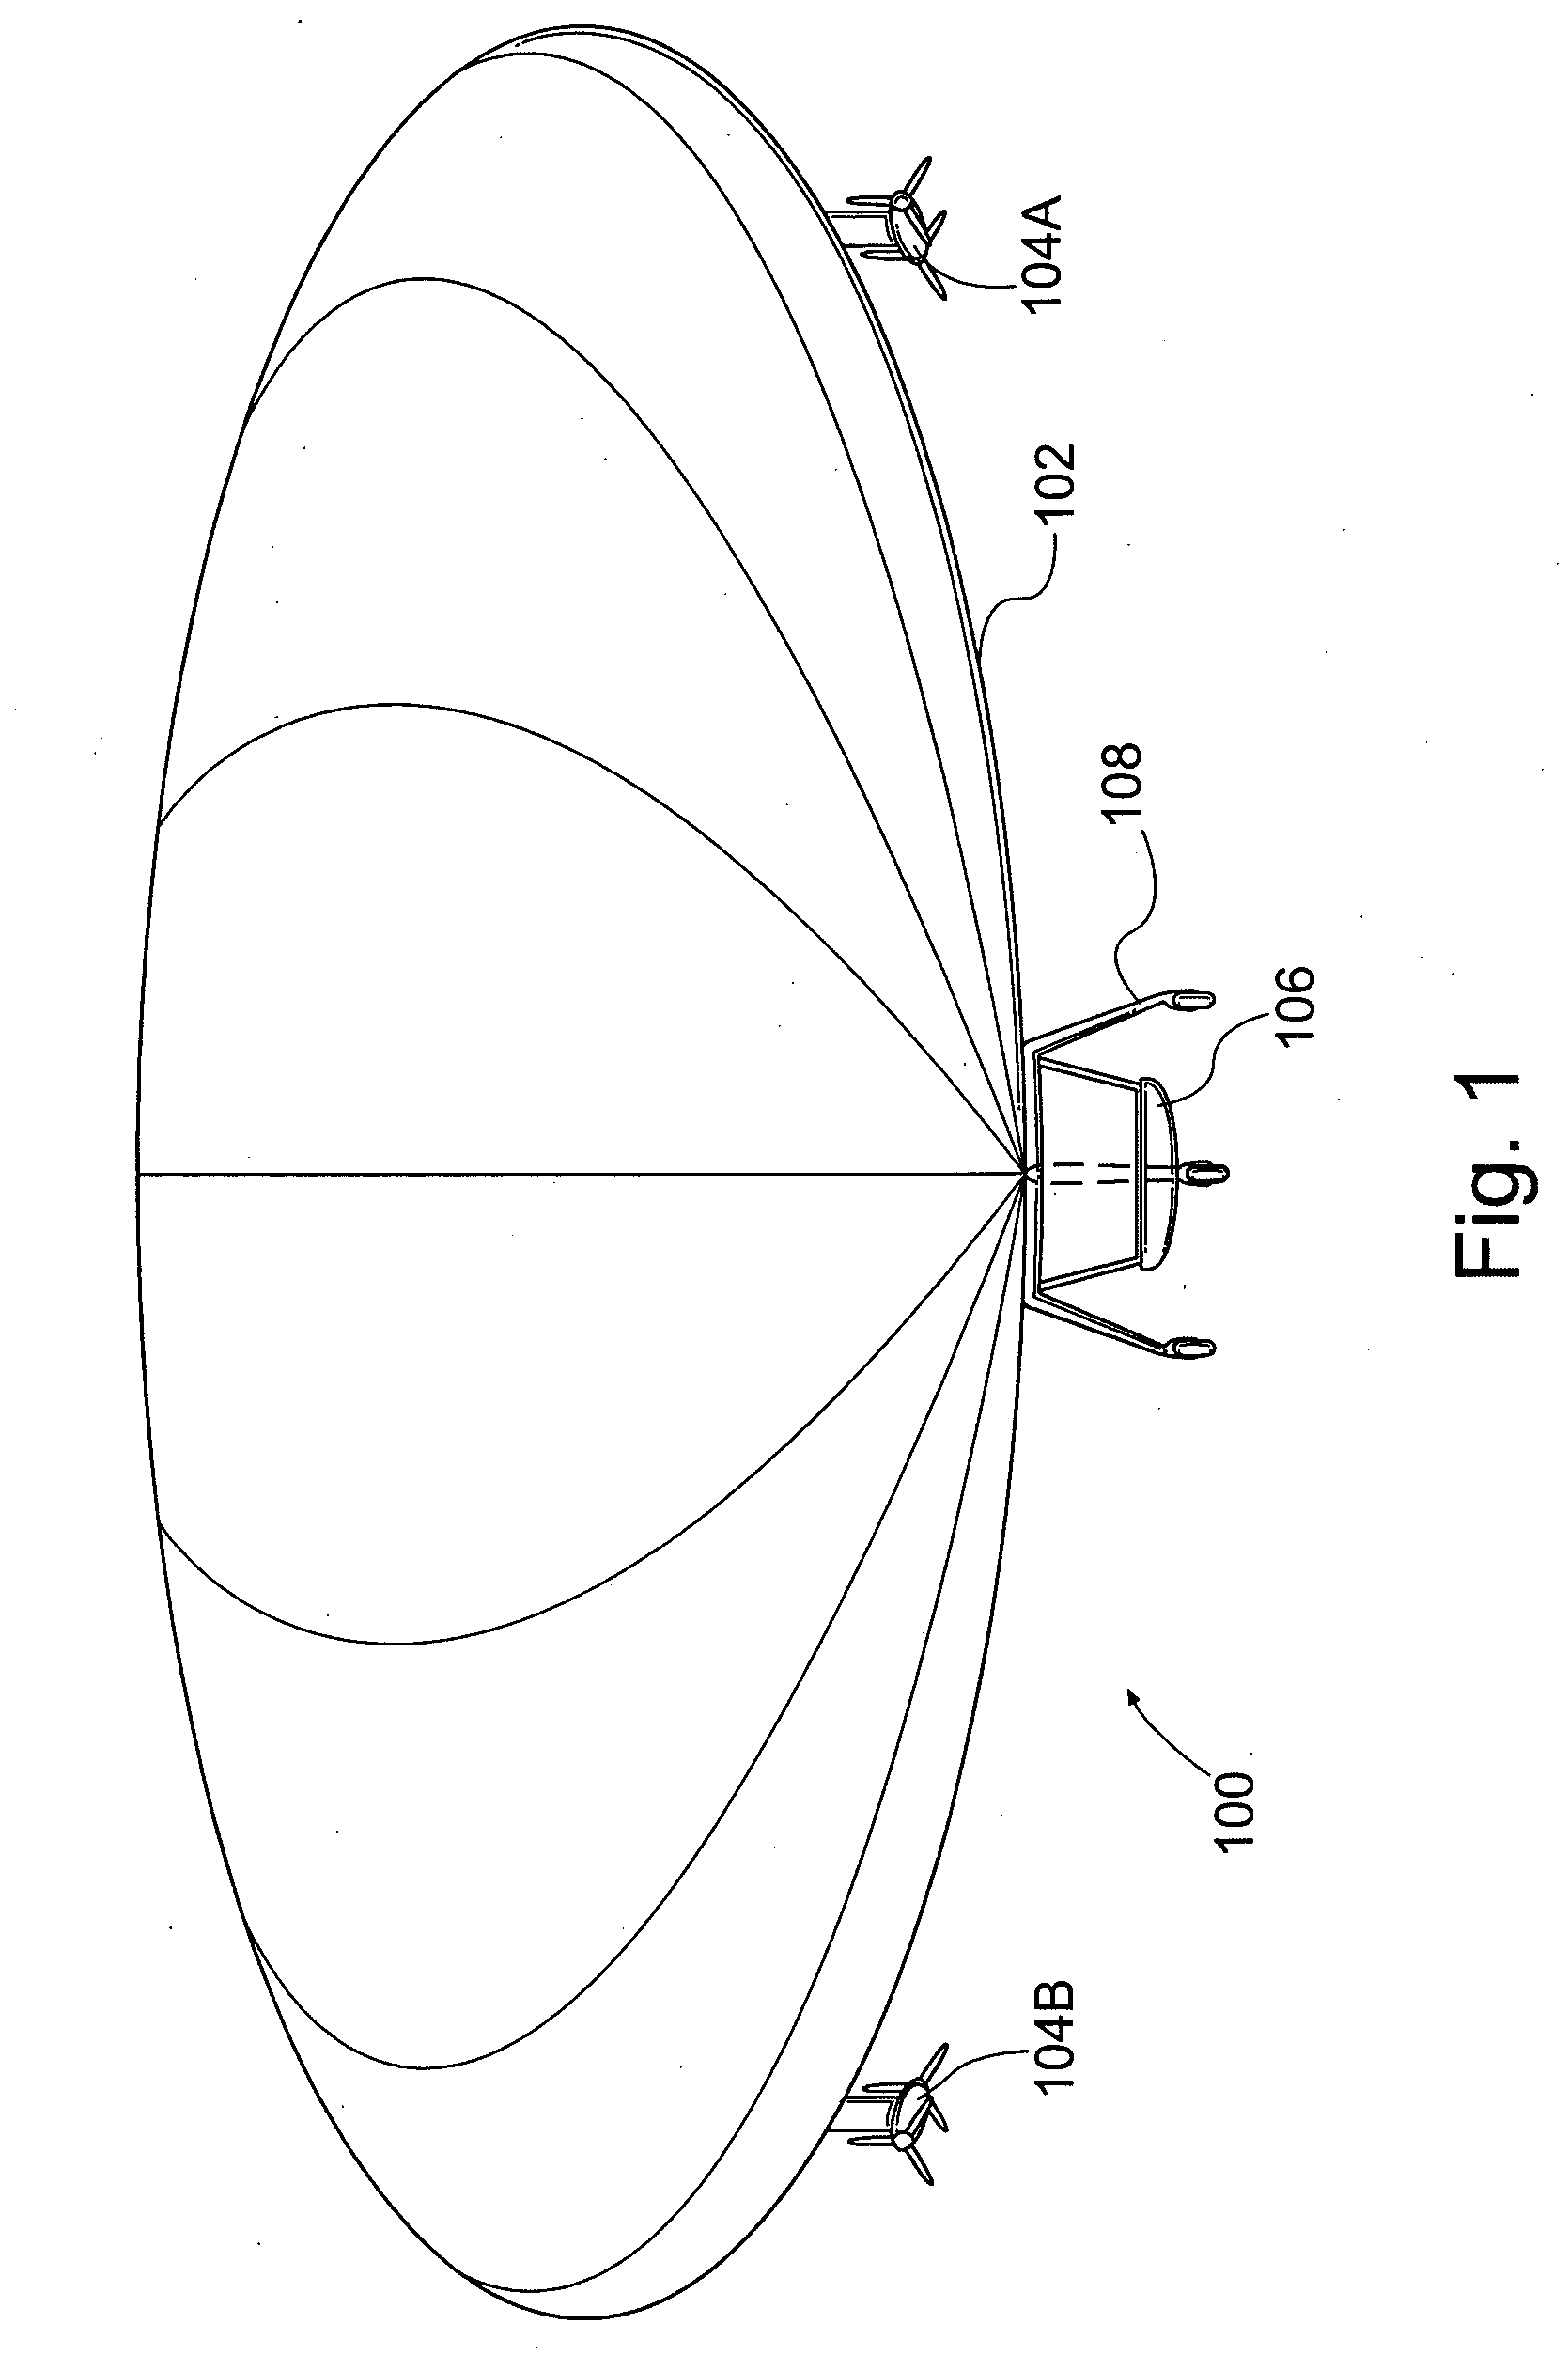 Systems for actively controlling the aerostatic lift of an airship